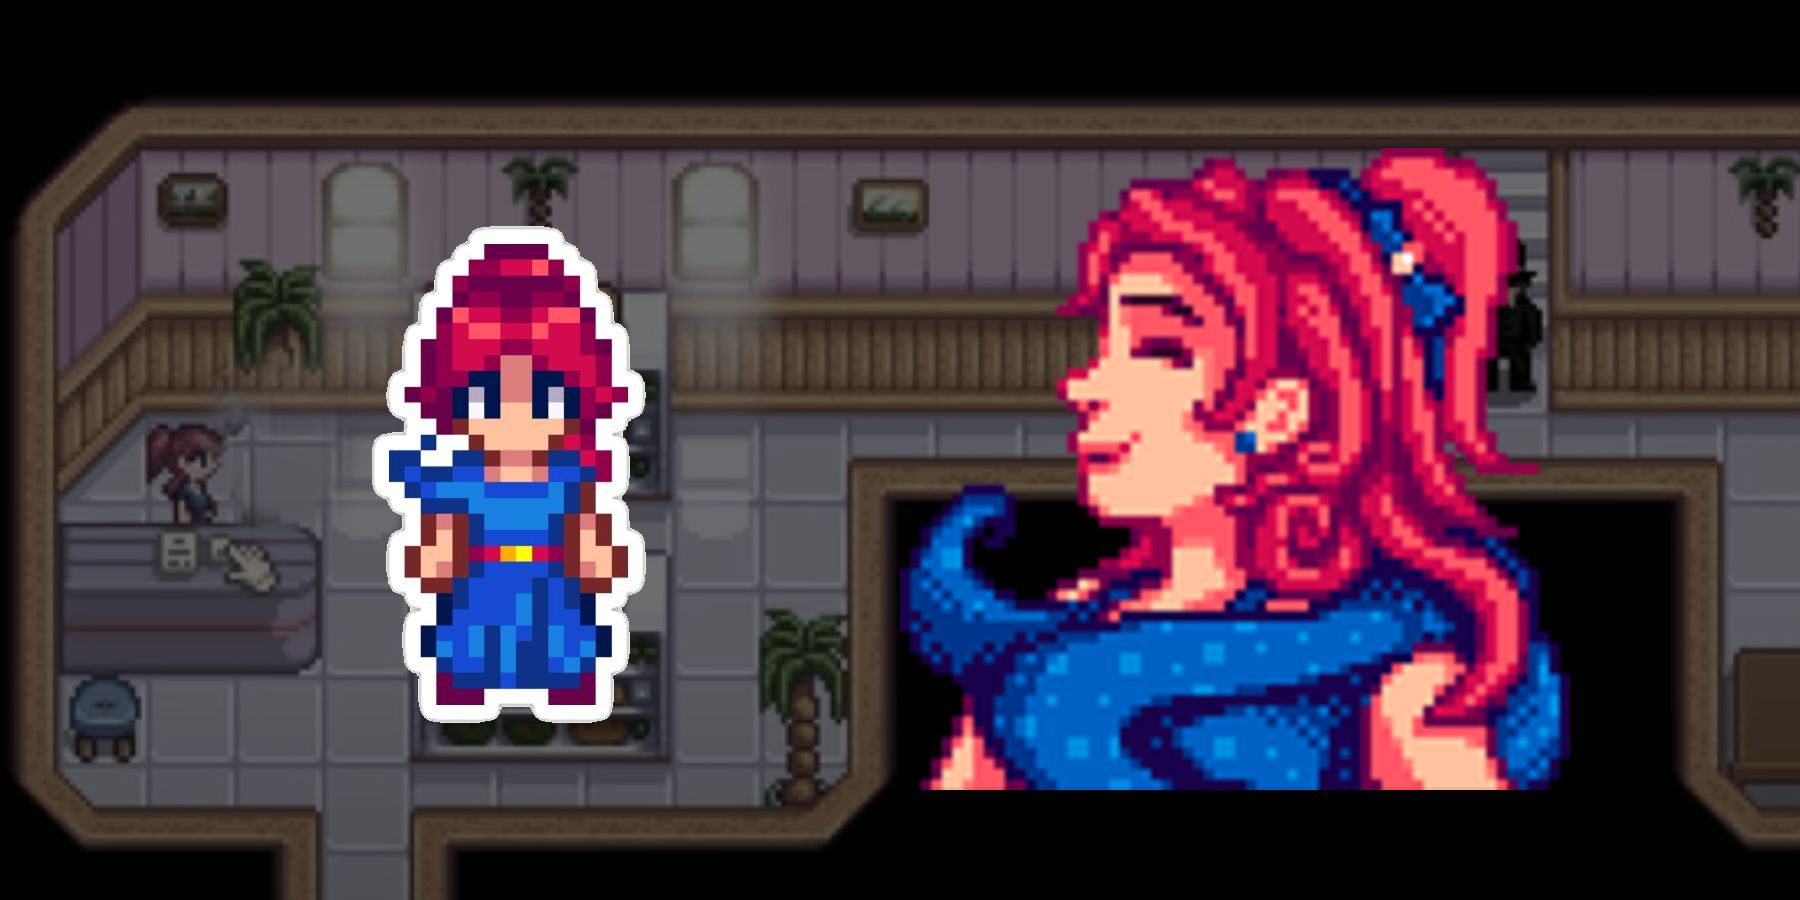 Who is Sandy in Stardew Valley